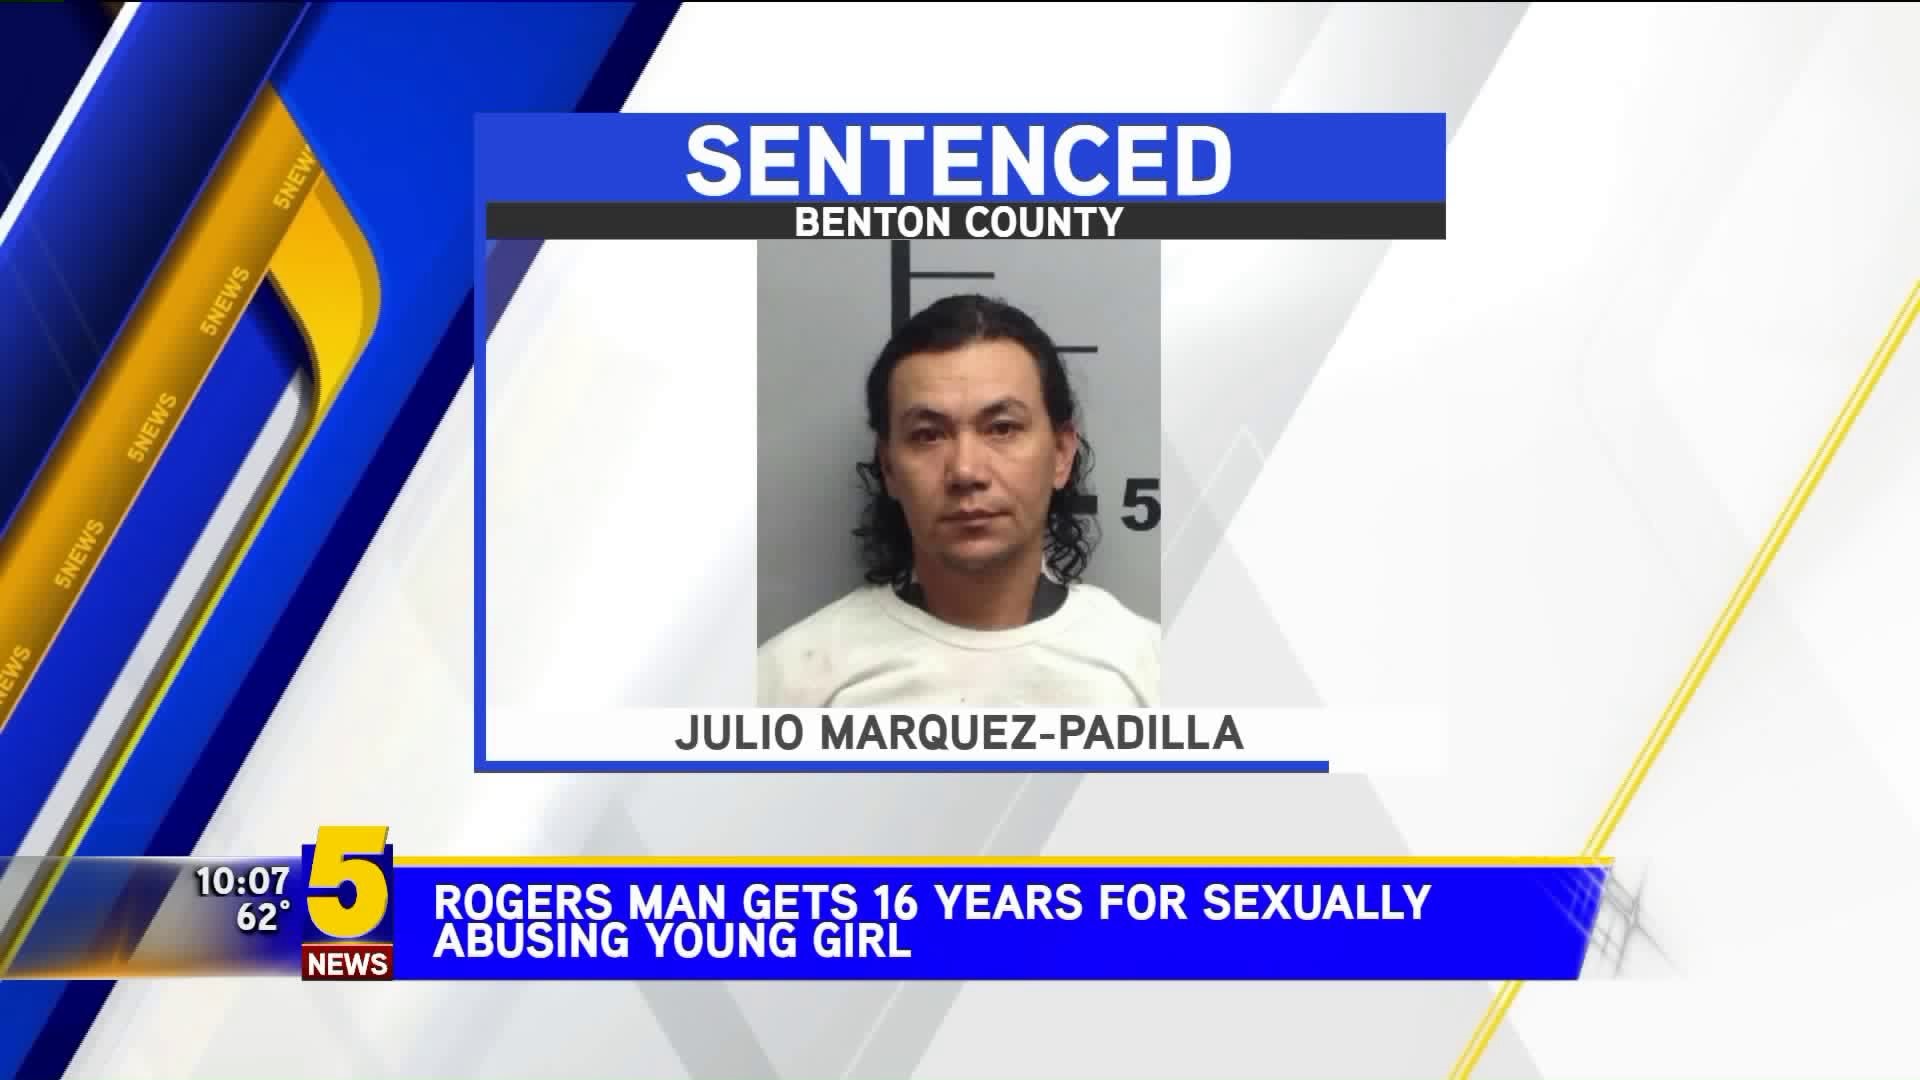 Rogers Man Gets 16 Years for Sexually Abusing Young Girl